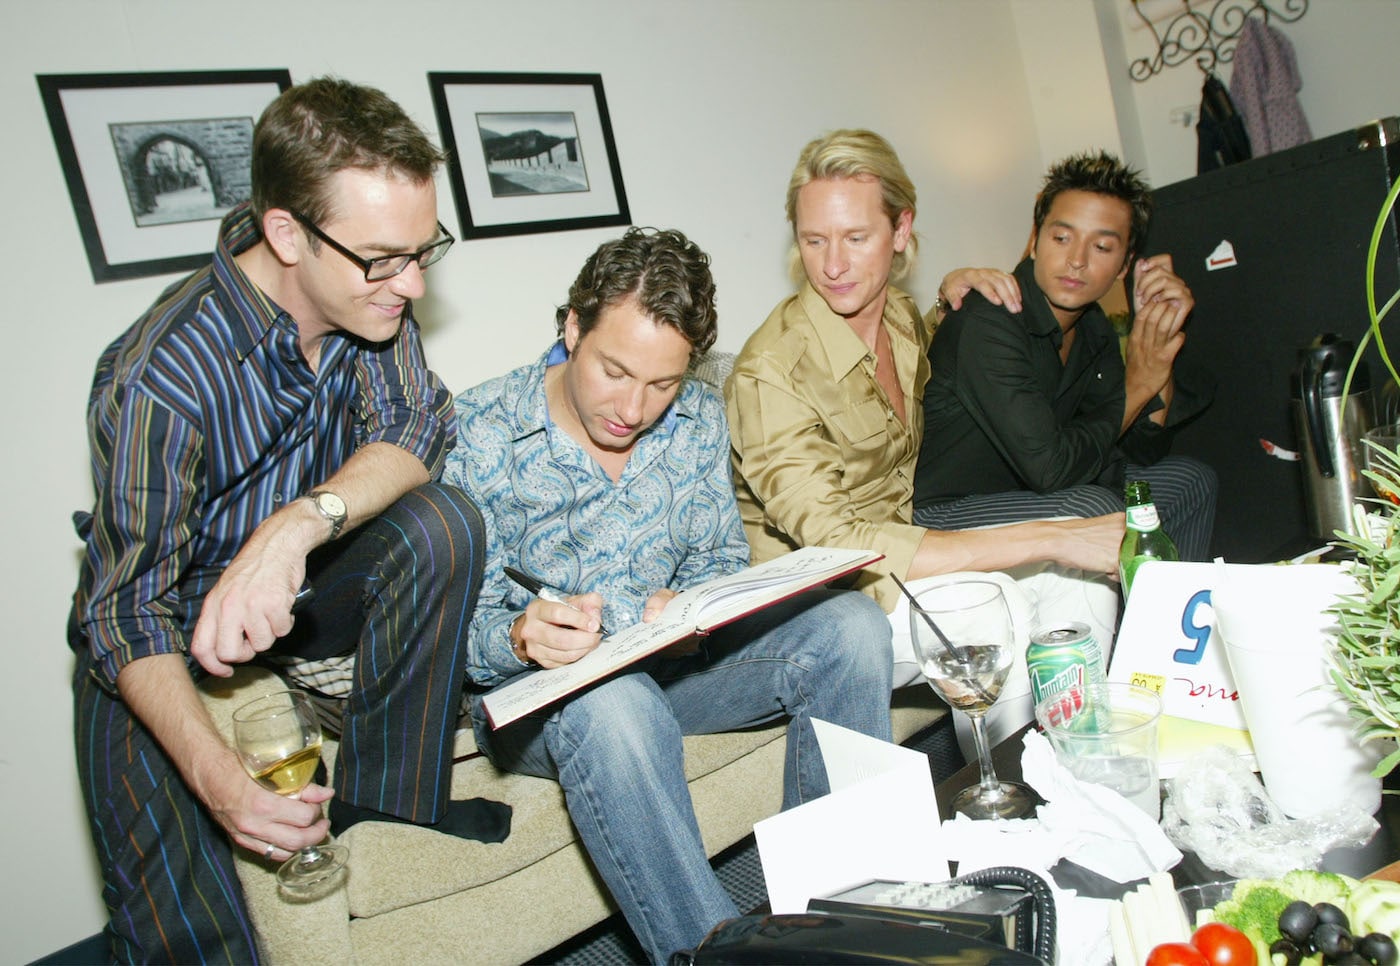 Carson Kressley signs a book while Ted Allen, Thom Filicia and Jai Rodriguez from 'Queer Eye for the Straight Guy' look on